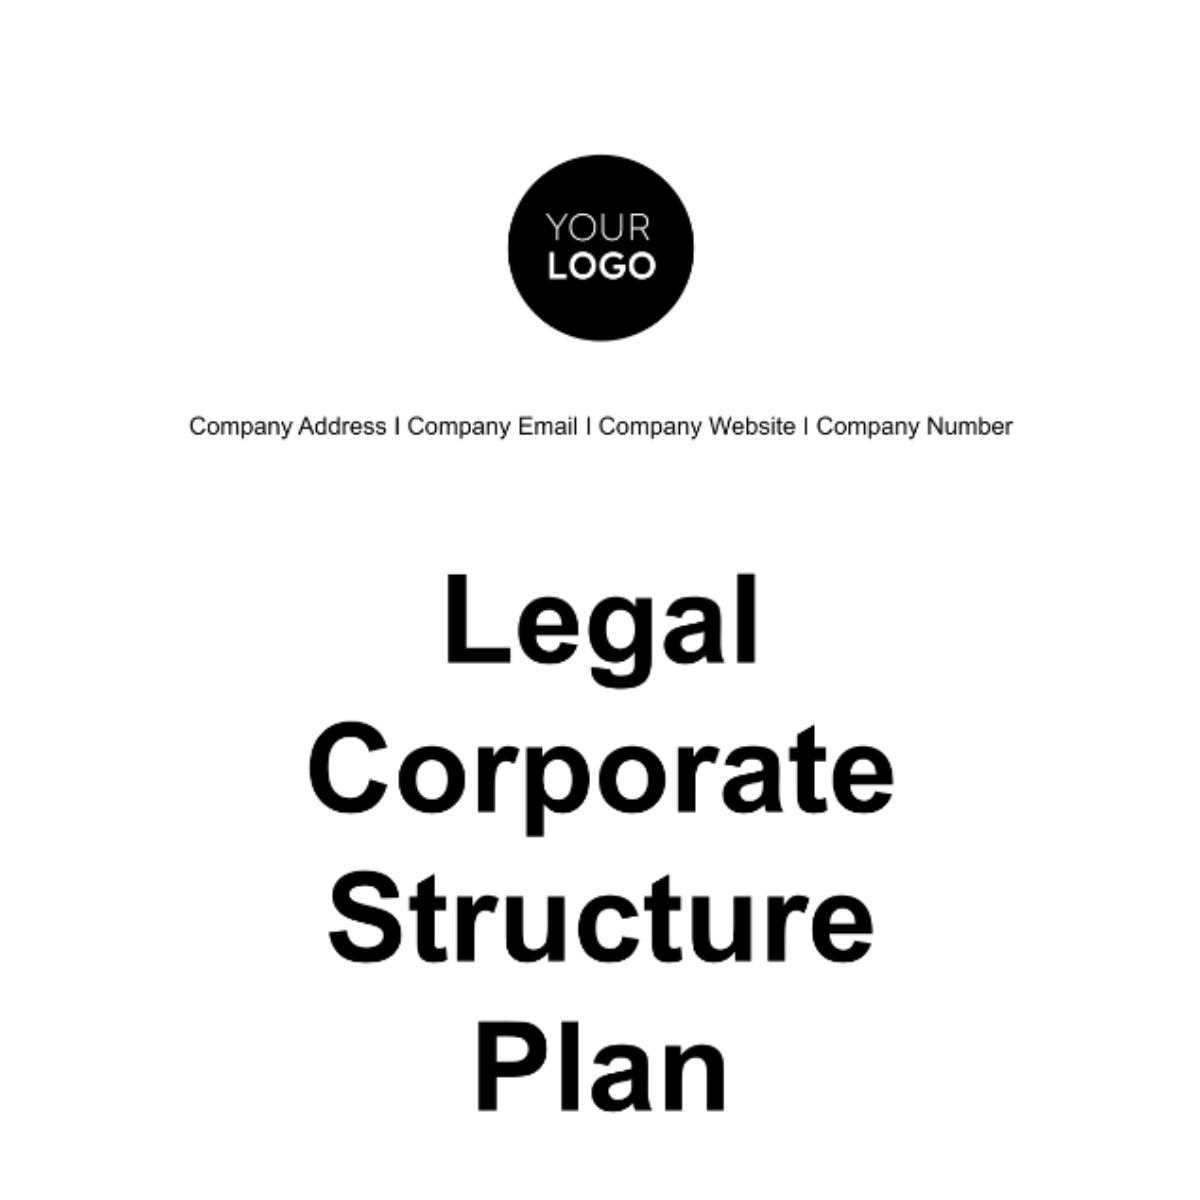 Legal Corporate Structure Plan Template